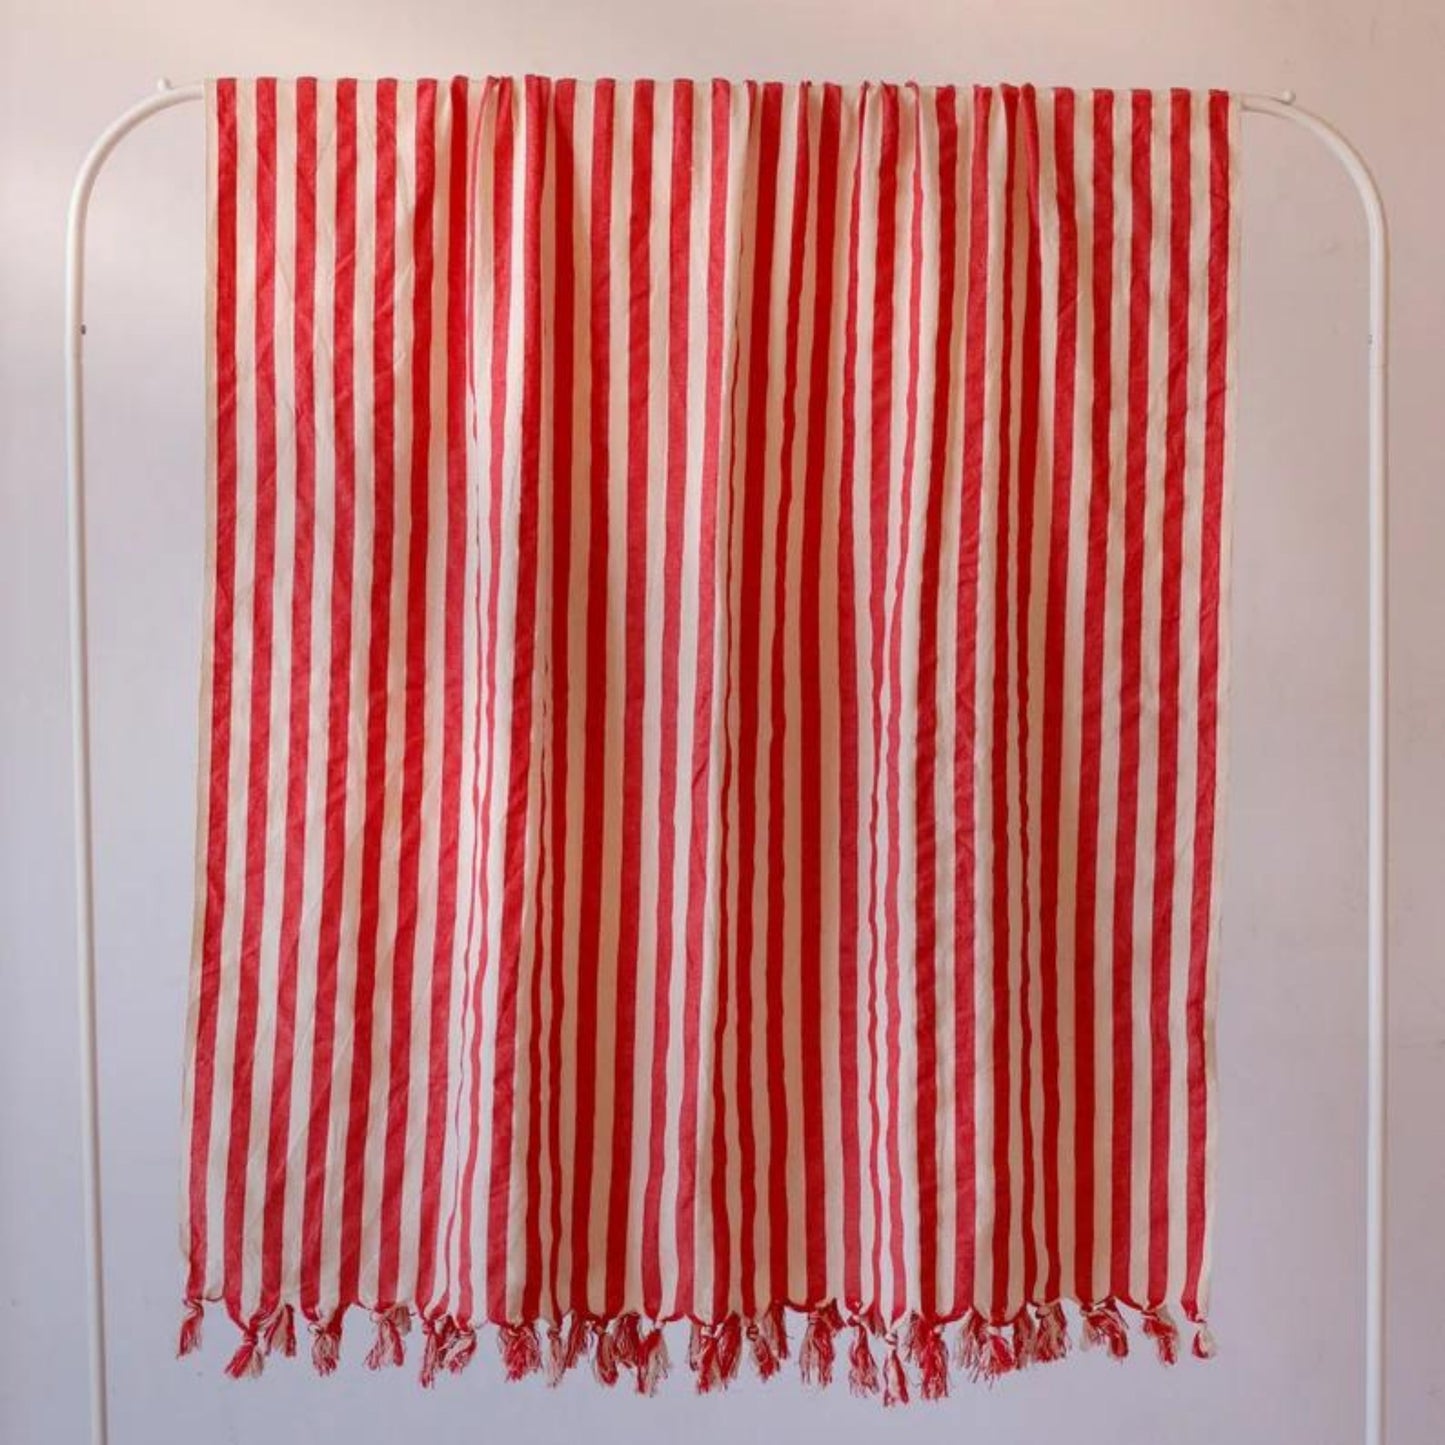 Bulk Turkish Towels Pack of 10 Pieces Red Striped, Black-Loom Weave